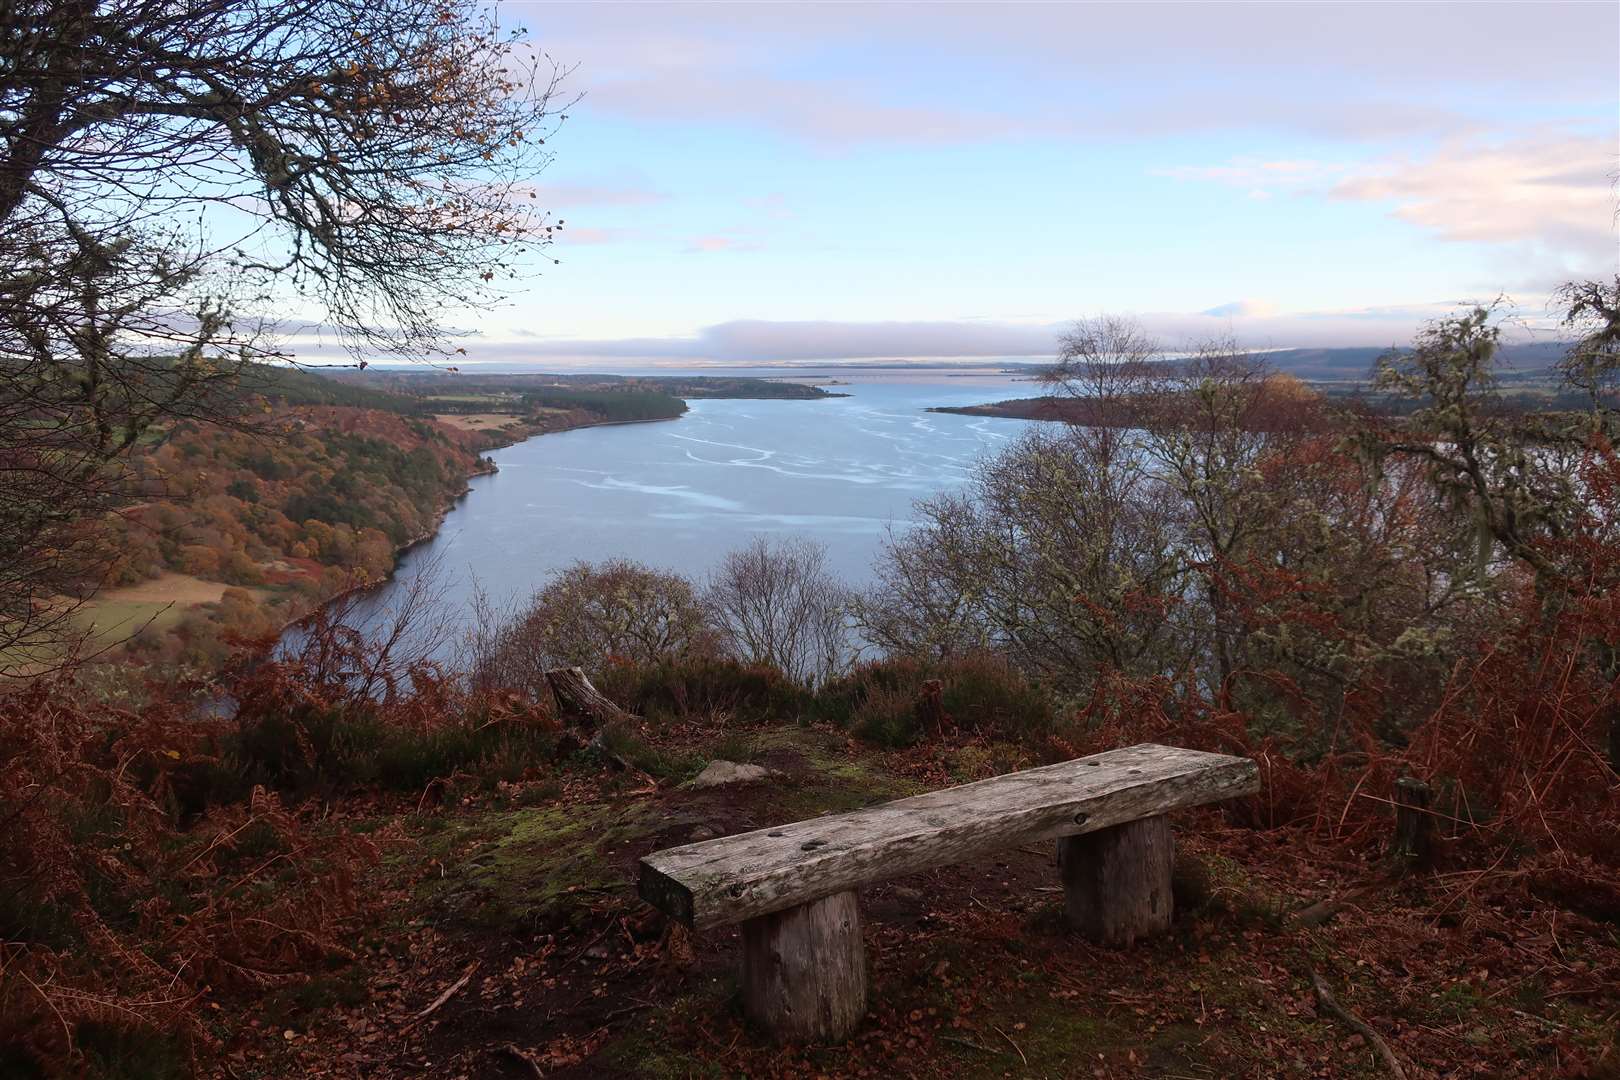 The Dornoch Firth from the end of the path in the Ledmore oakwood.